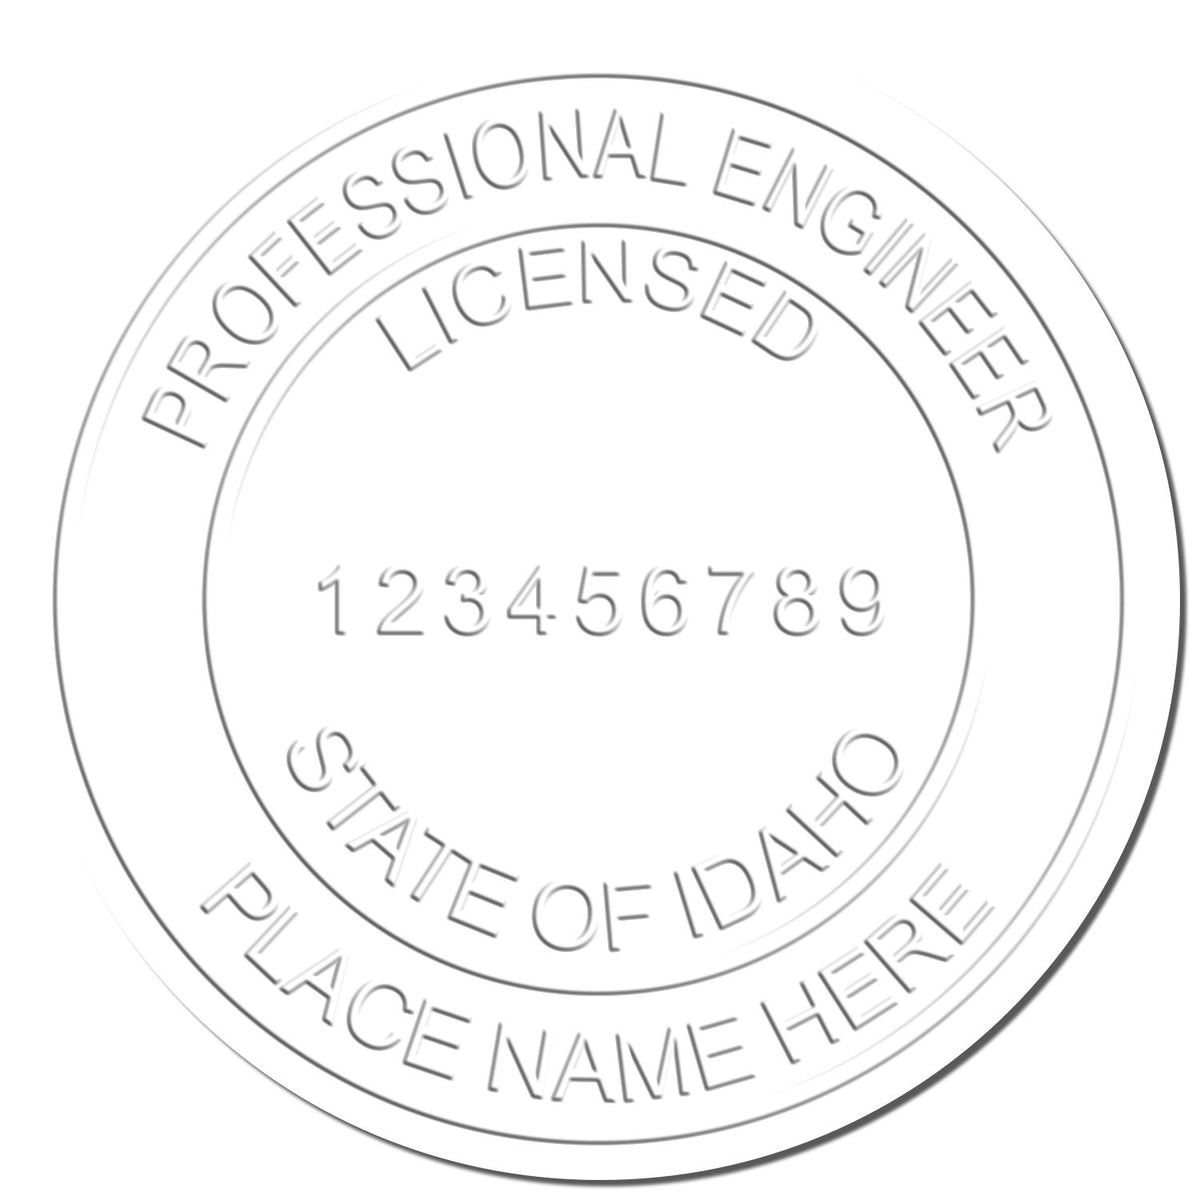 A photograph of the Handheld Idaho Professional Engineer Embosser stamp impression reveals a vivid, professional image of the on paper.